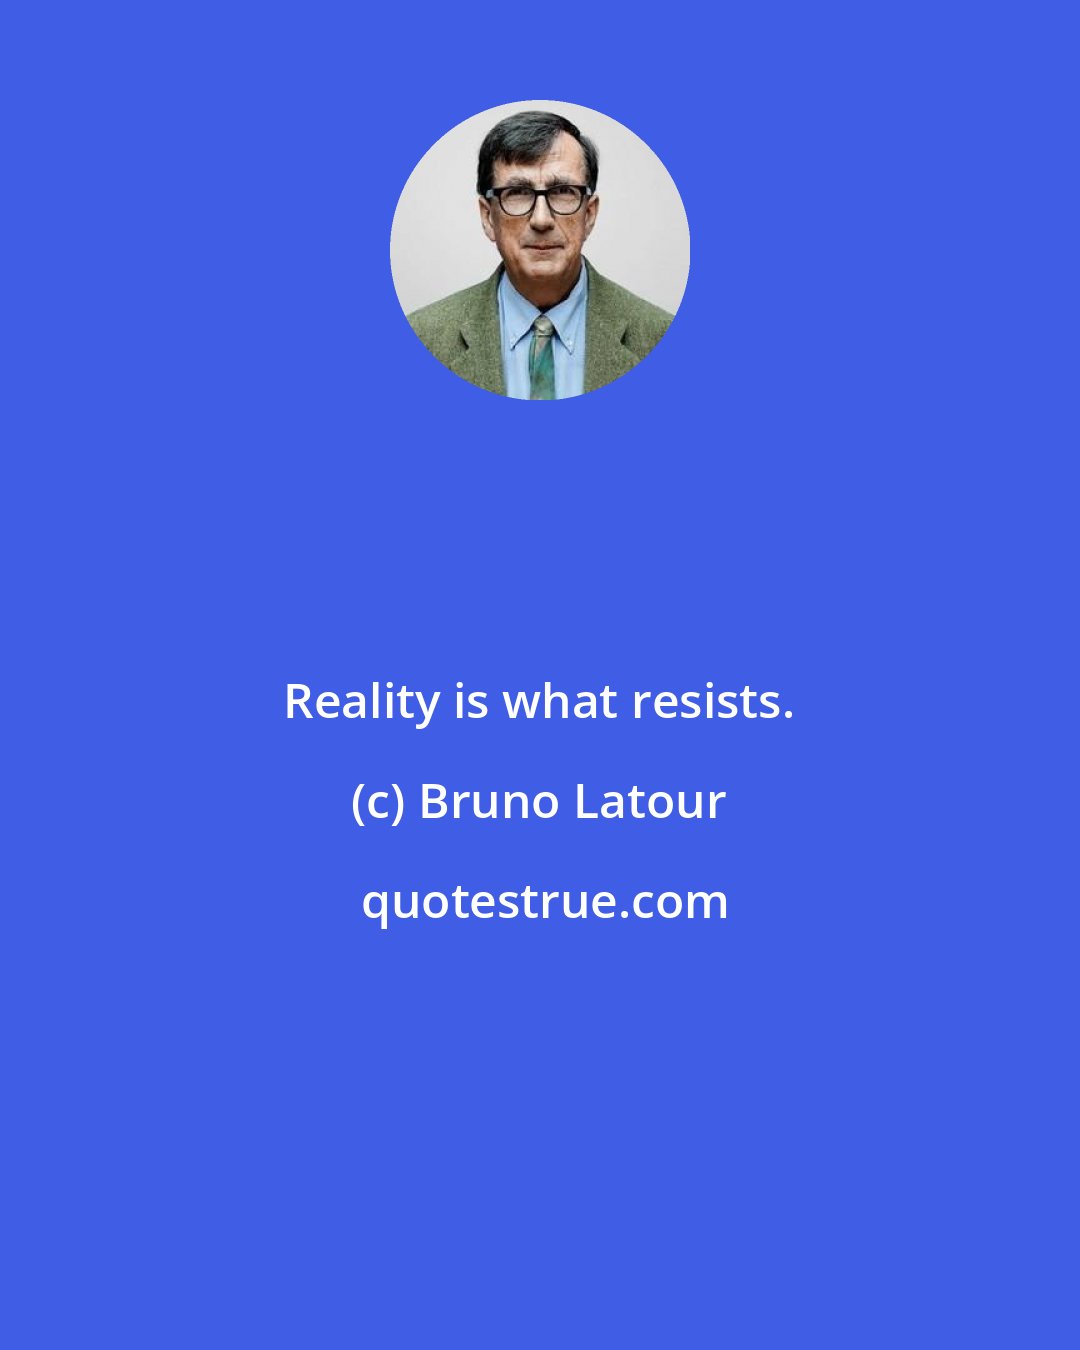 Bruno Latour: Reality is what resists.